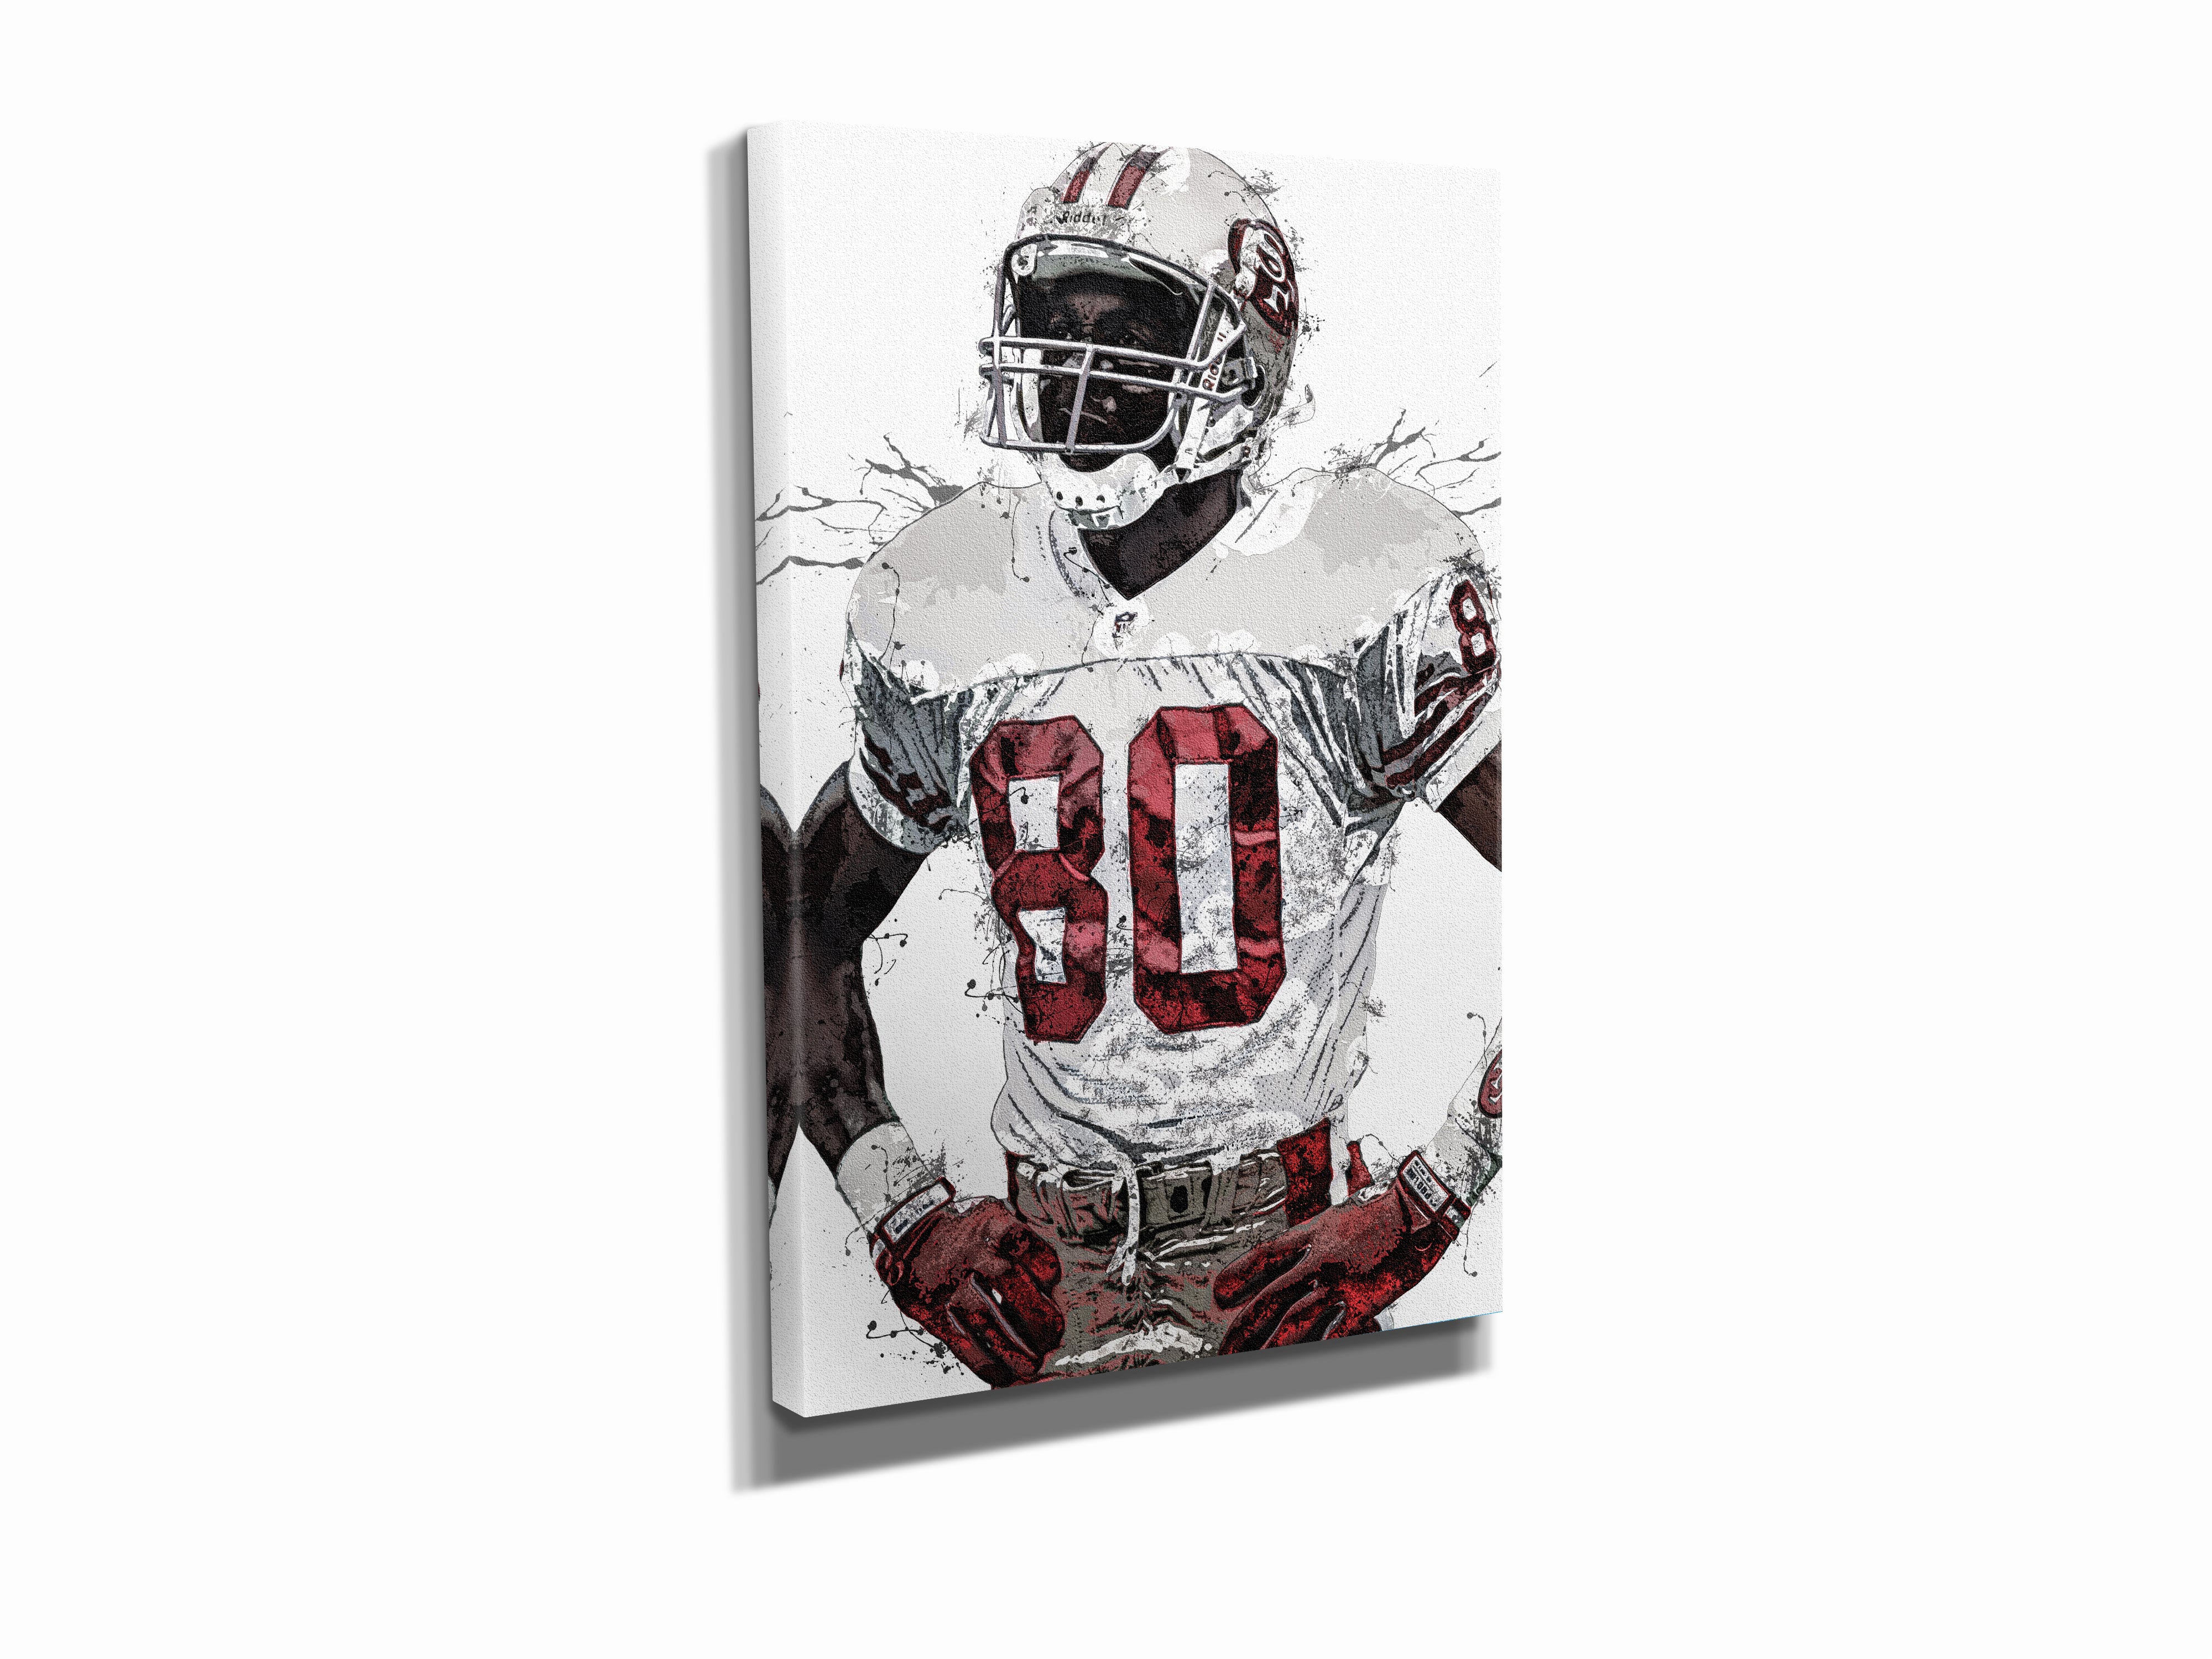 Jerry Rice Poster San Francisco 49ers Football Painting Hand Made Post –  CanvasBlackArt